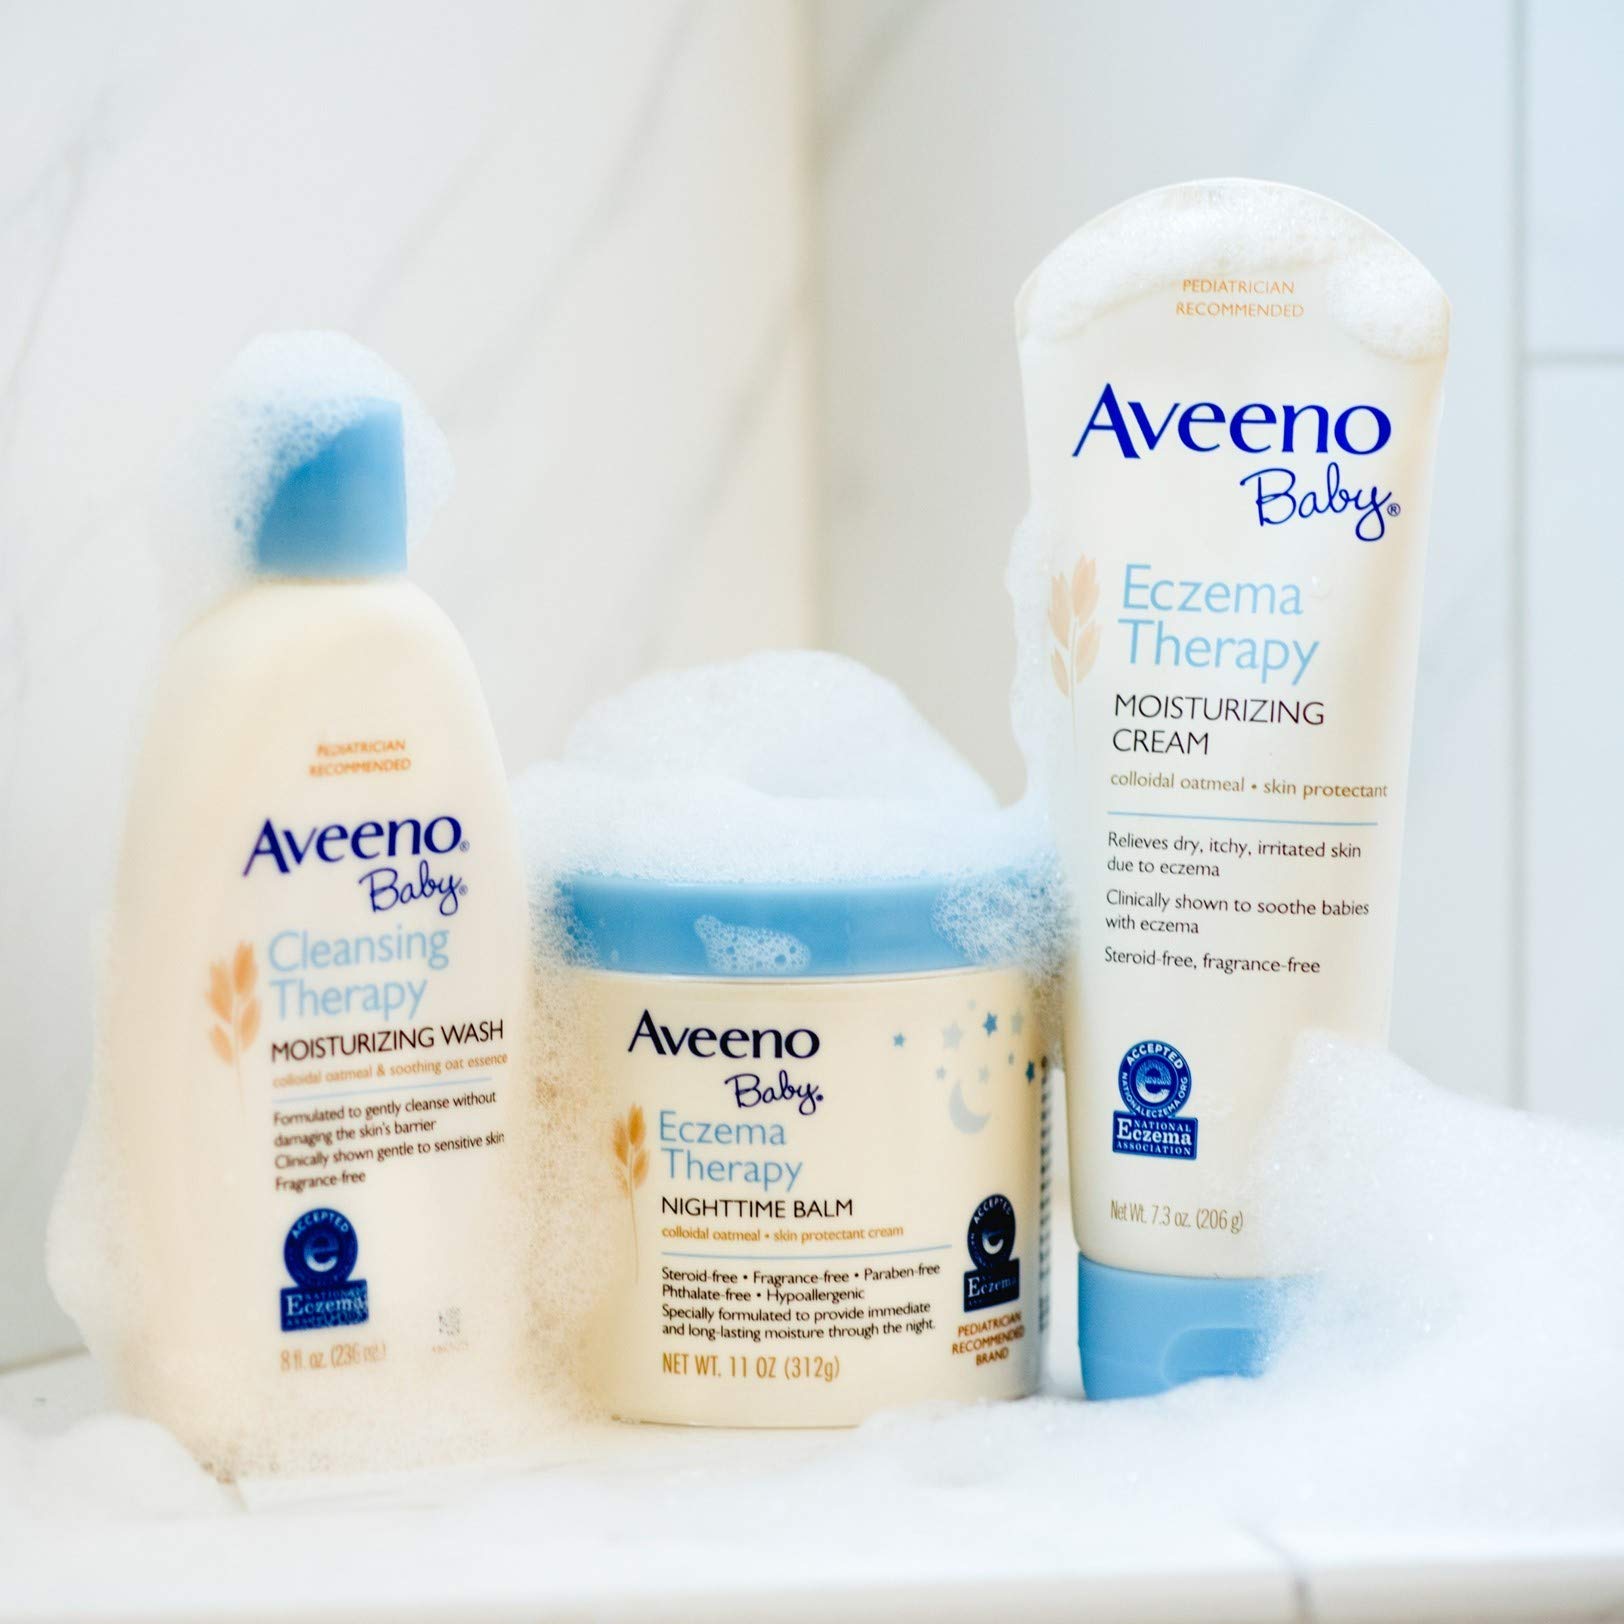 Aveeno Baby Eczema Therapy Nighttime Balm with Natural Colloidal ...